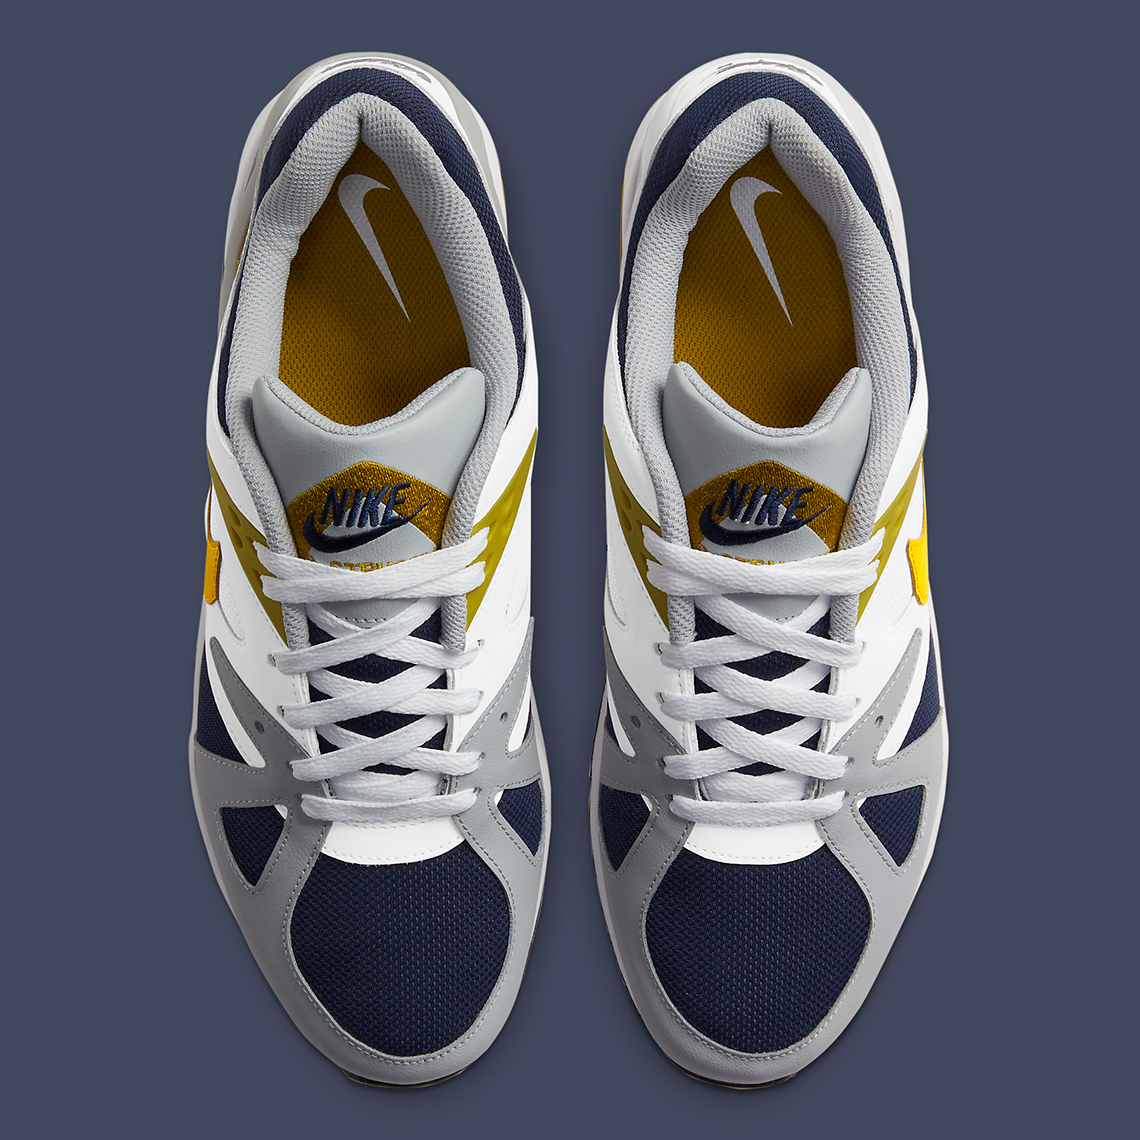 Nike Air Structure Triax 91 Navy Grey Gold DB1549-400 | SneakerNews.com